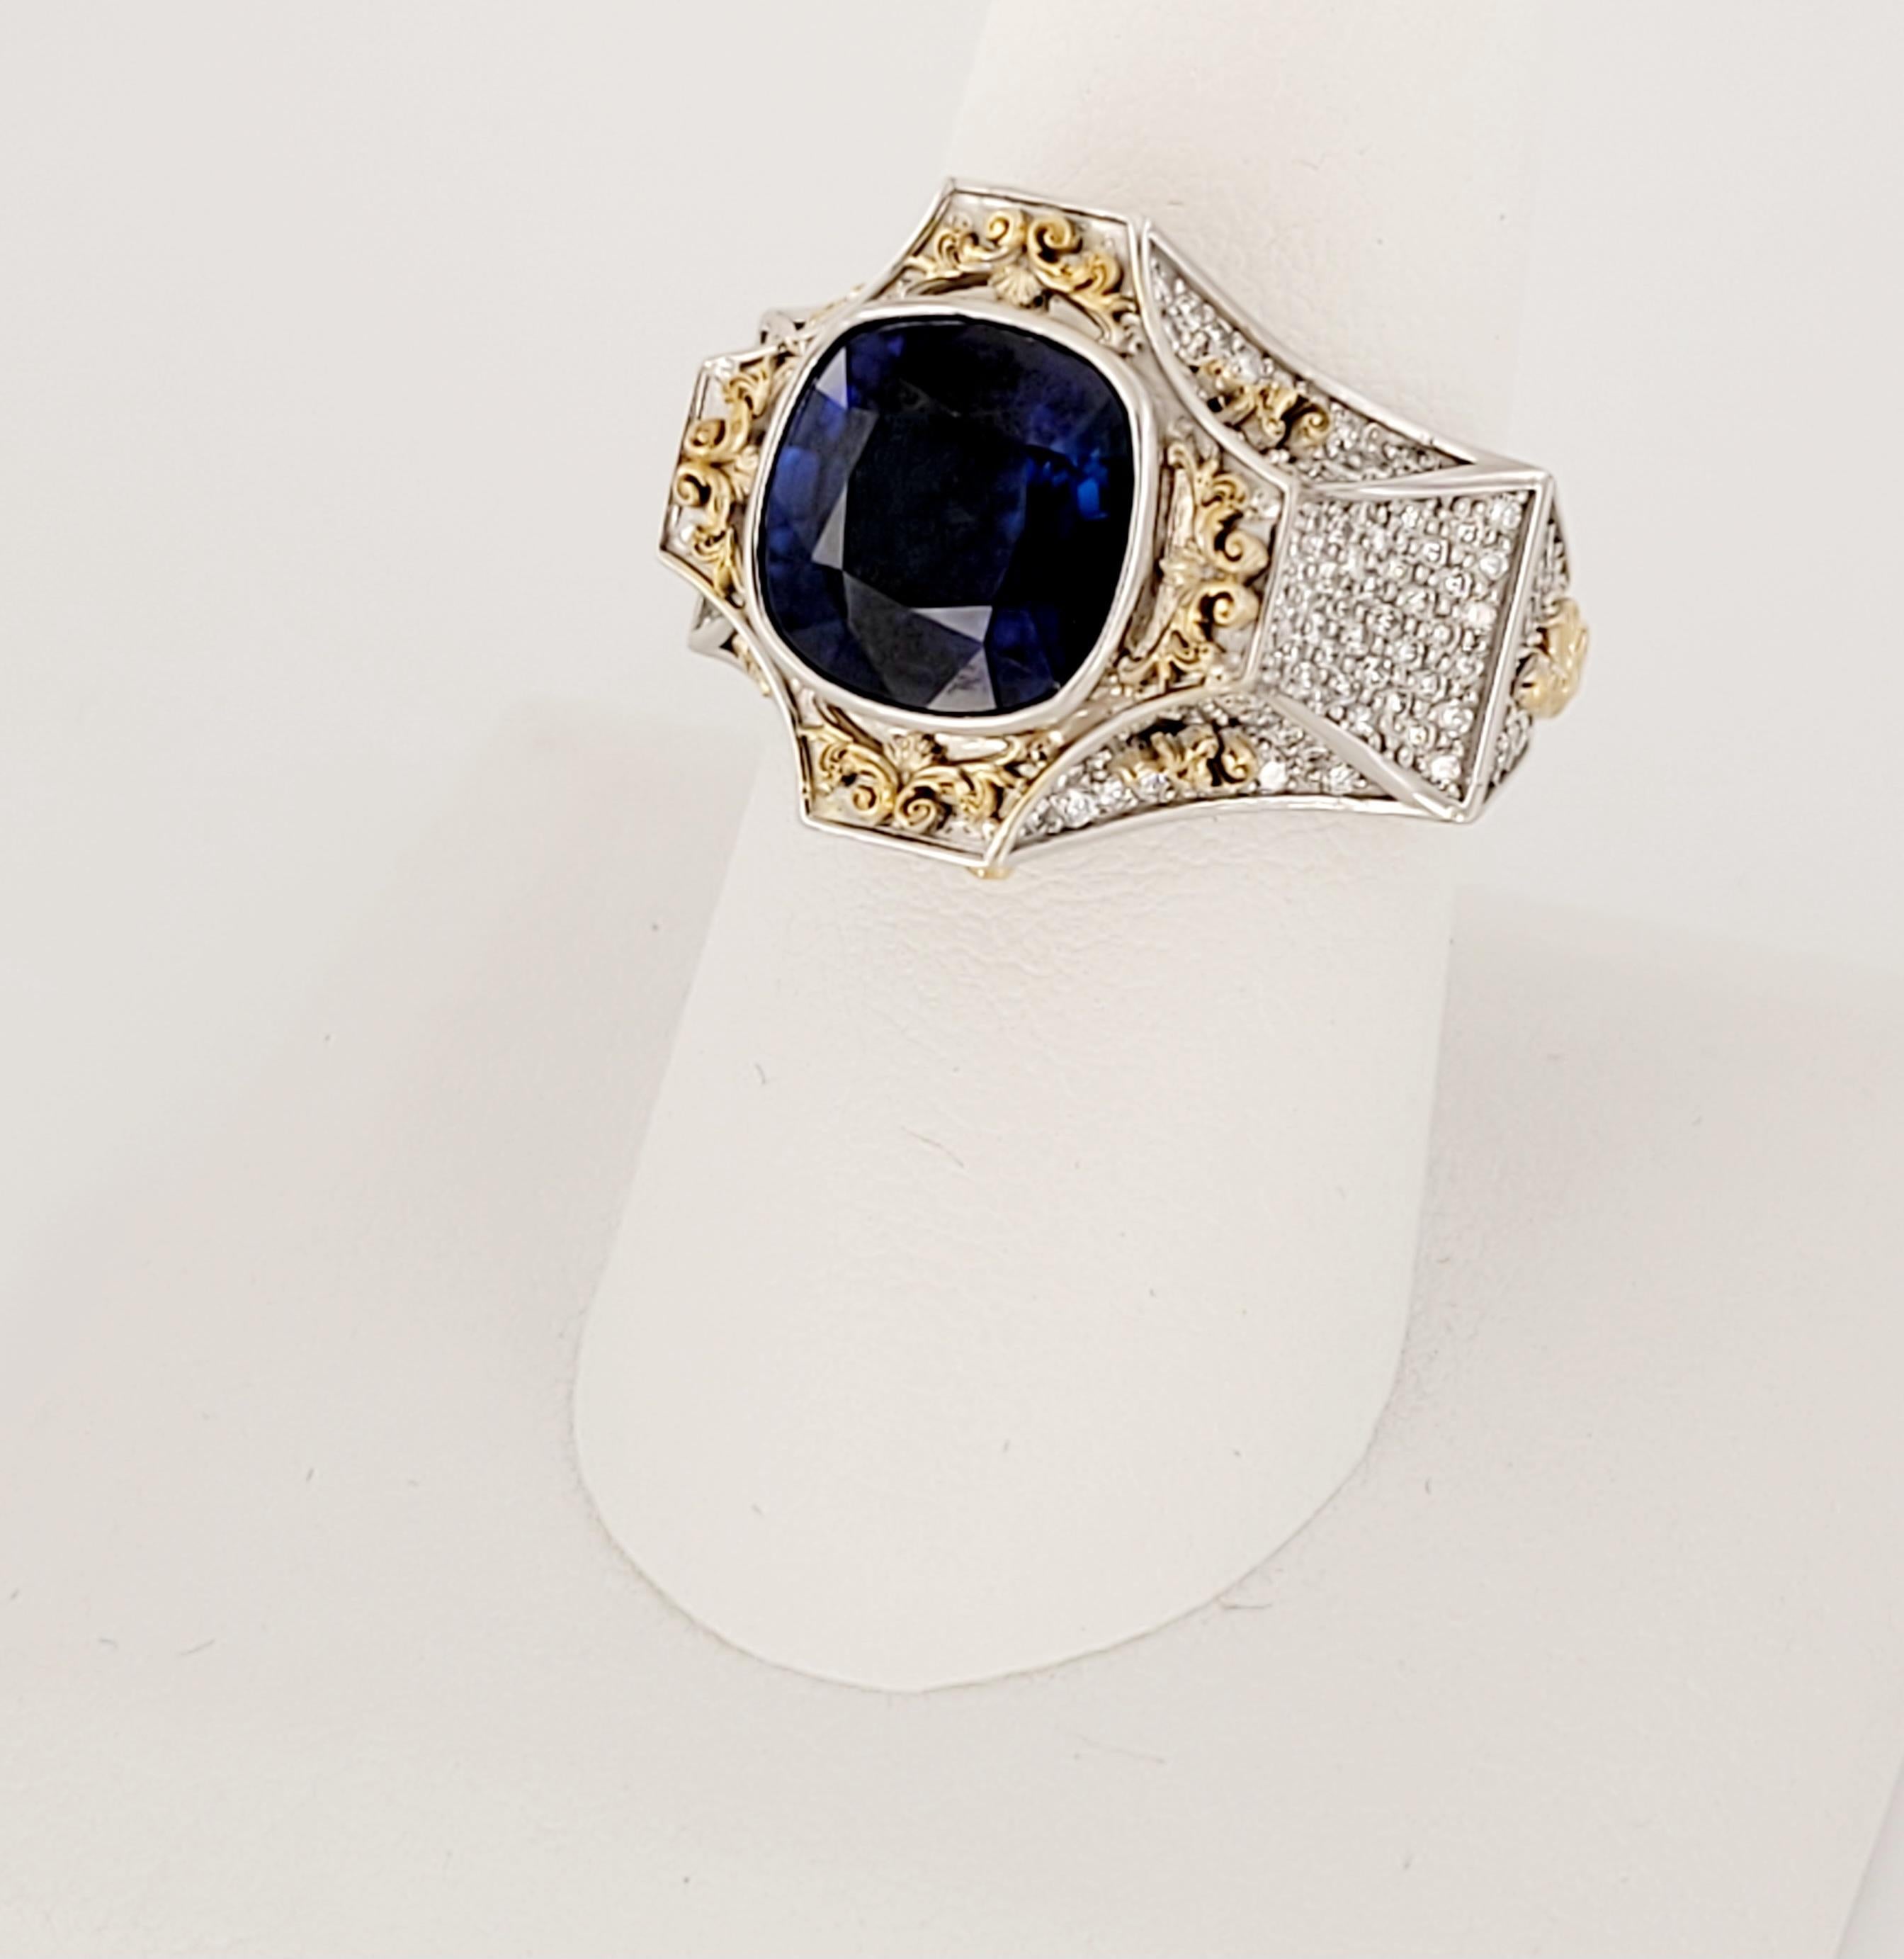 Radiant Cut Unbranded Two-Tone Sapphire Men's Ring in 14K White Gold Size 8.75 For Sale